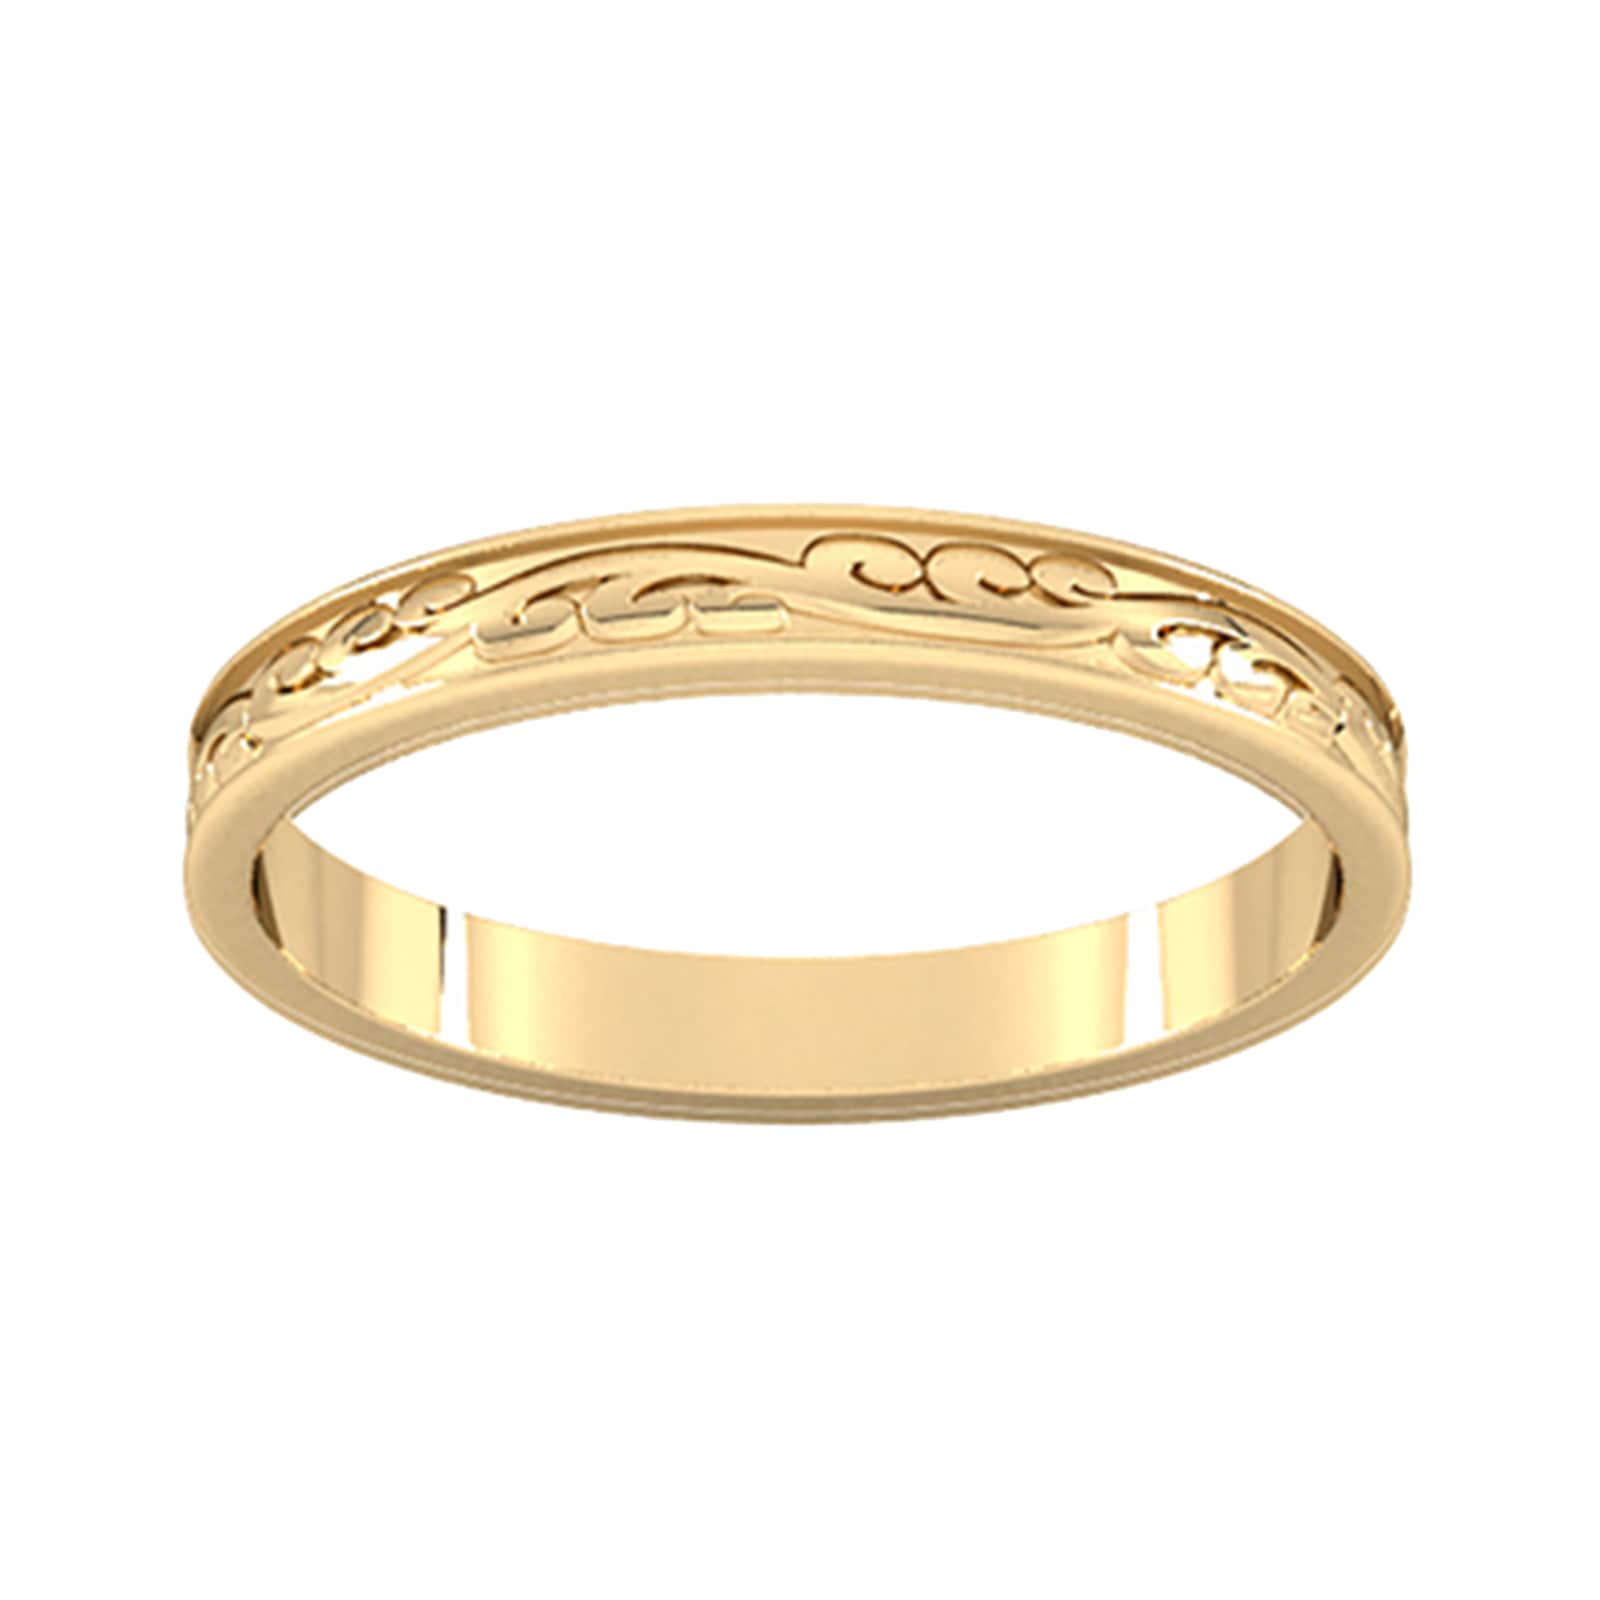 2.5mm Hand Engraved Wedding Ring In 9 Carat Yellow Gold - Ring Size U